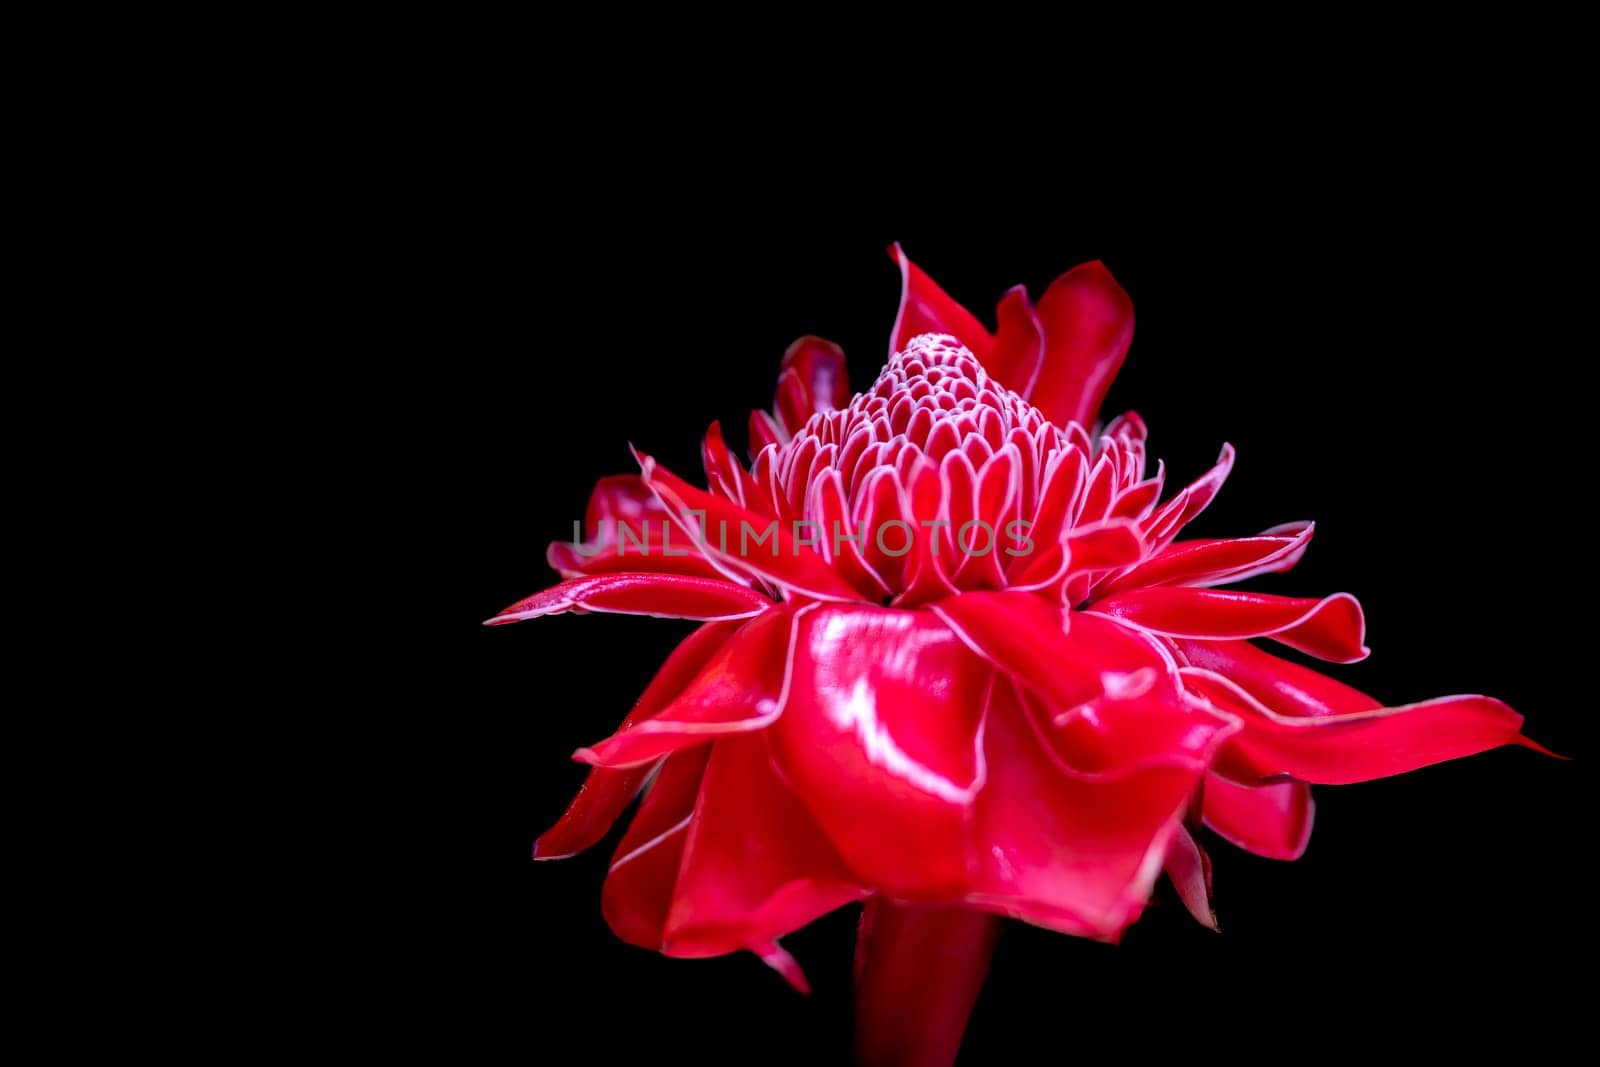 A vibrant red tropical flower pops against a dark background, symbolizing sophistication and intense emotion.